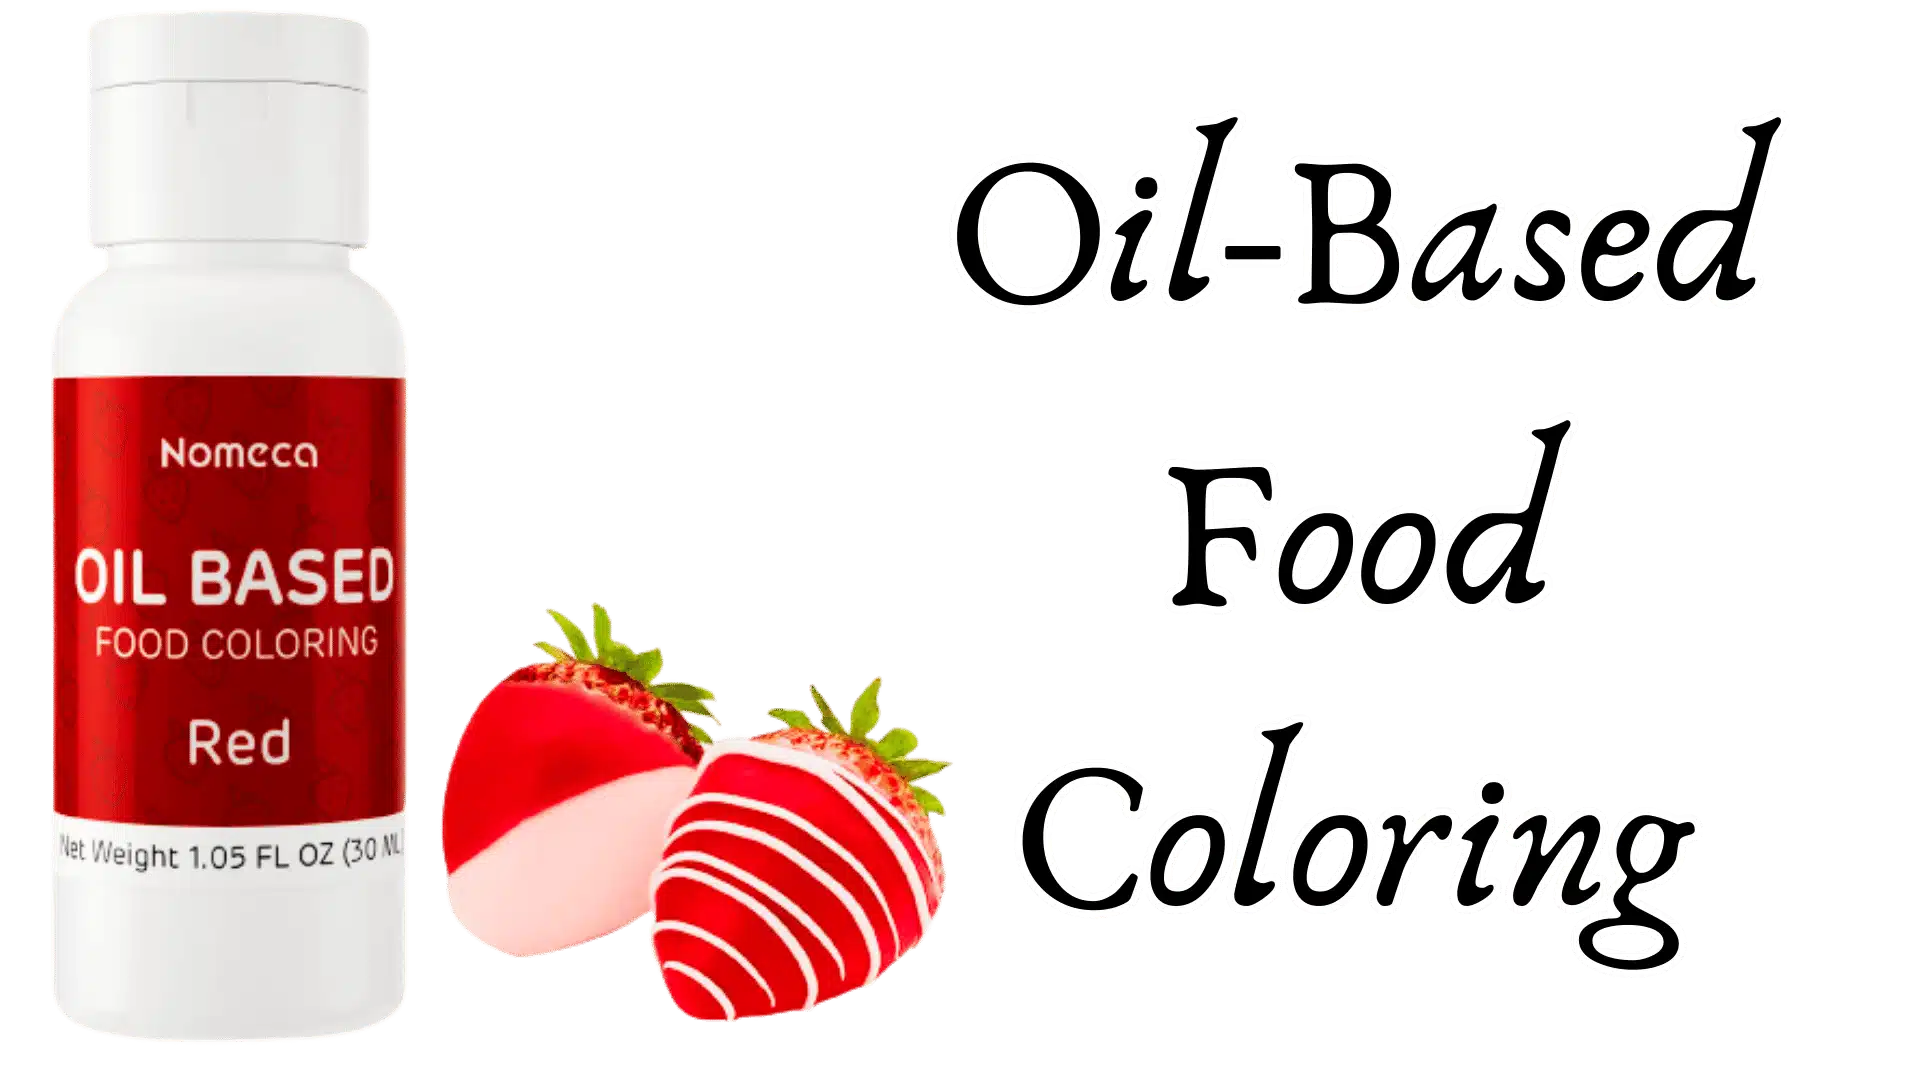 Oil based food coloring